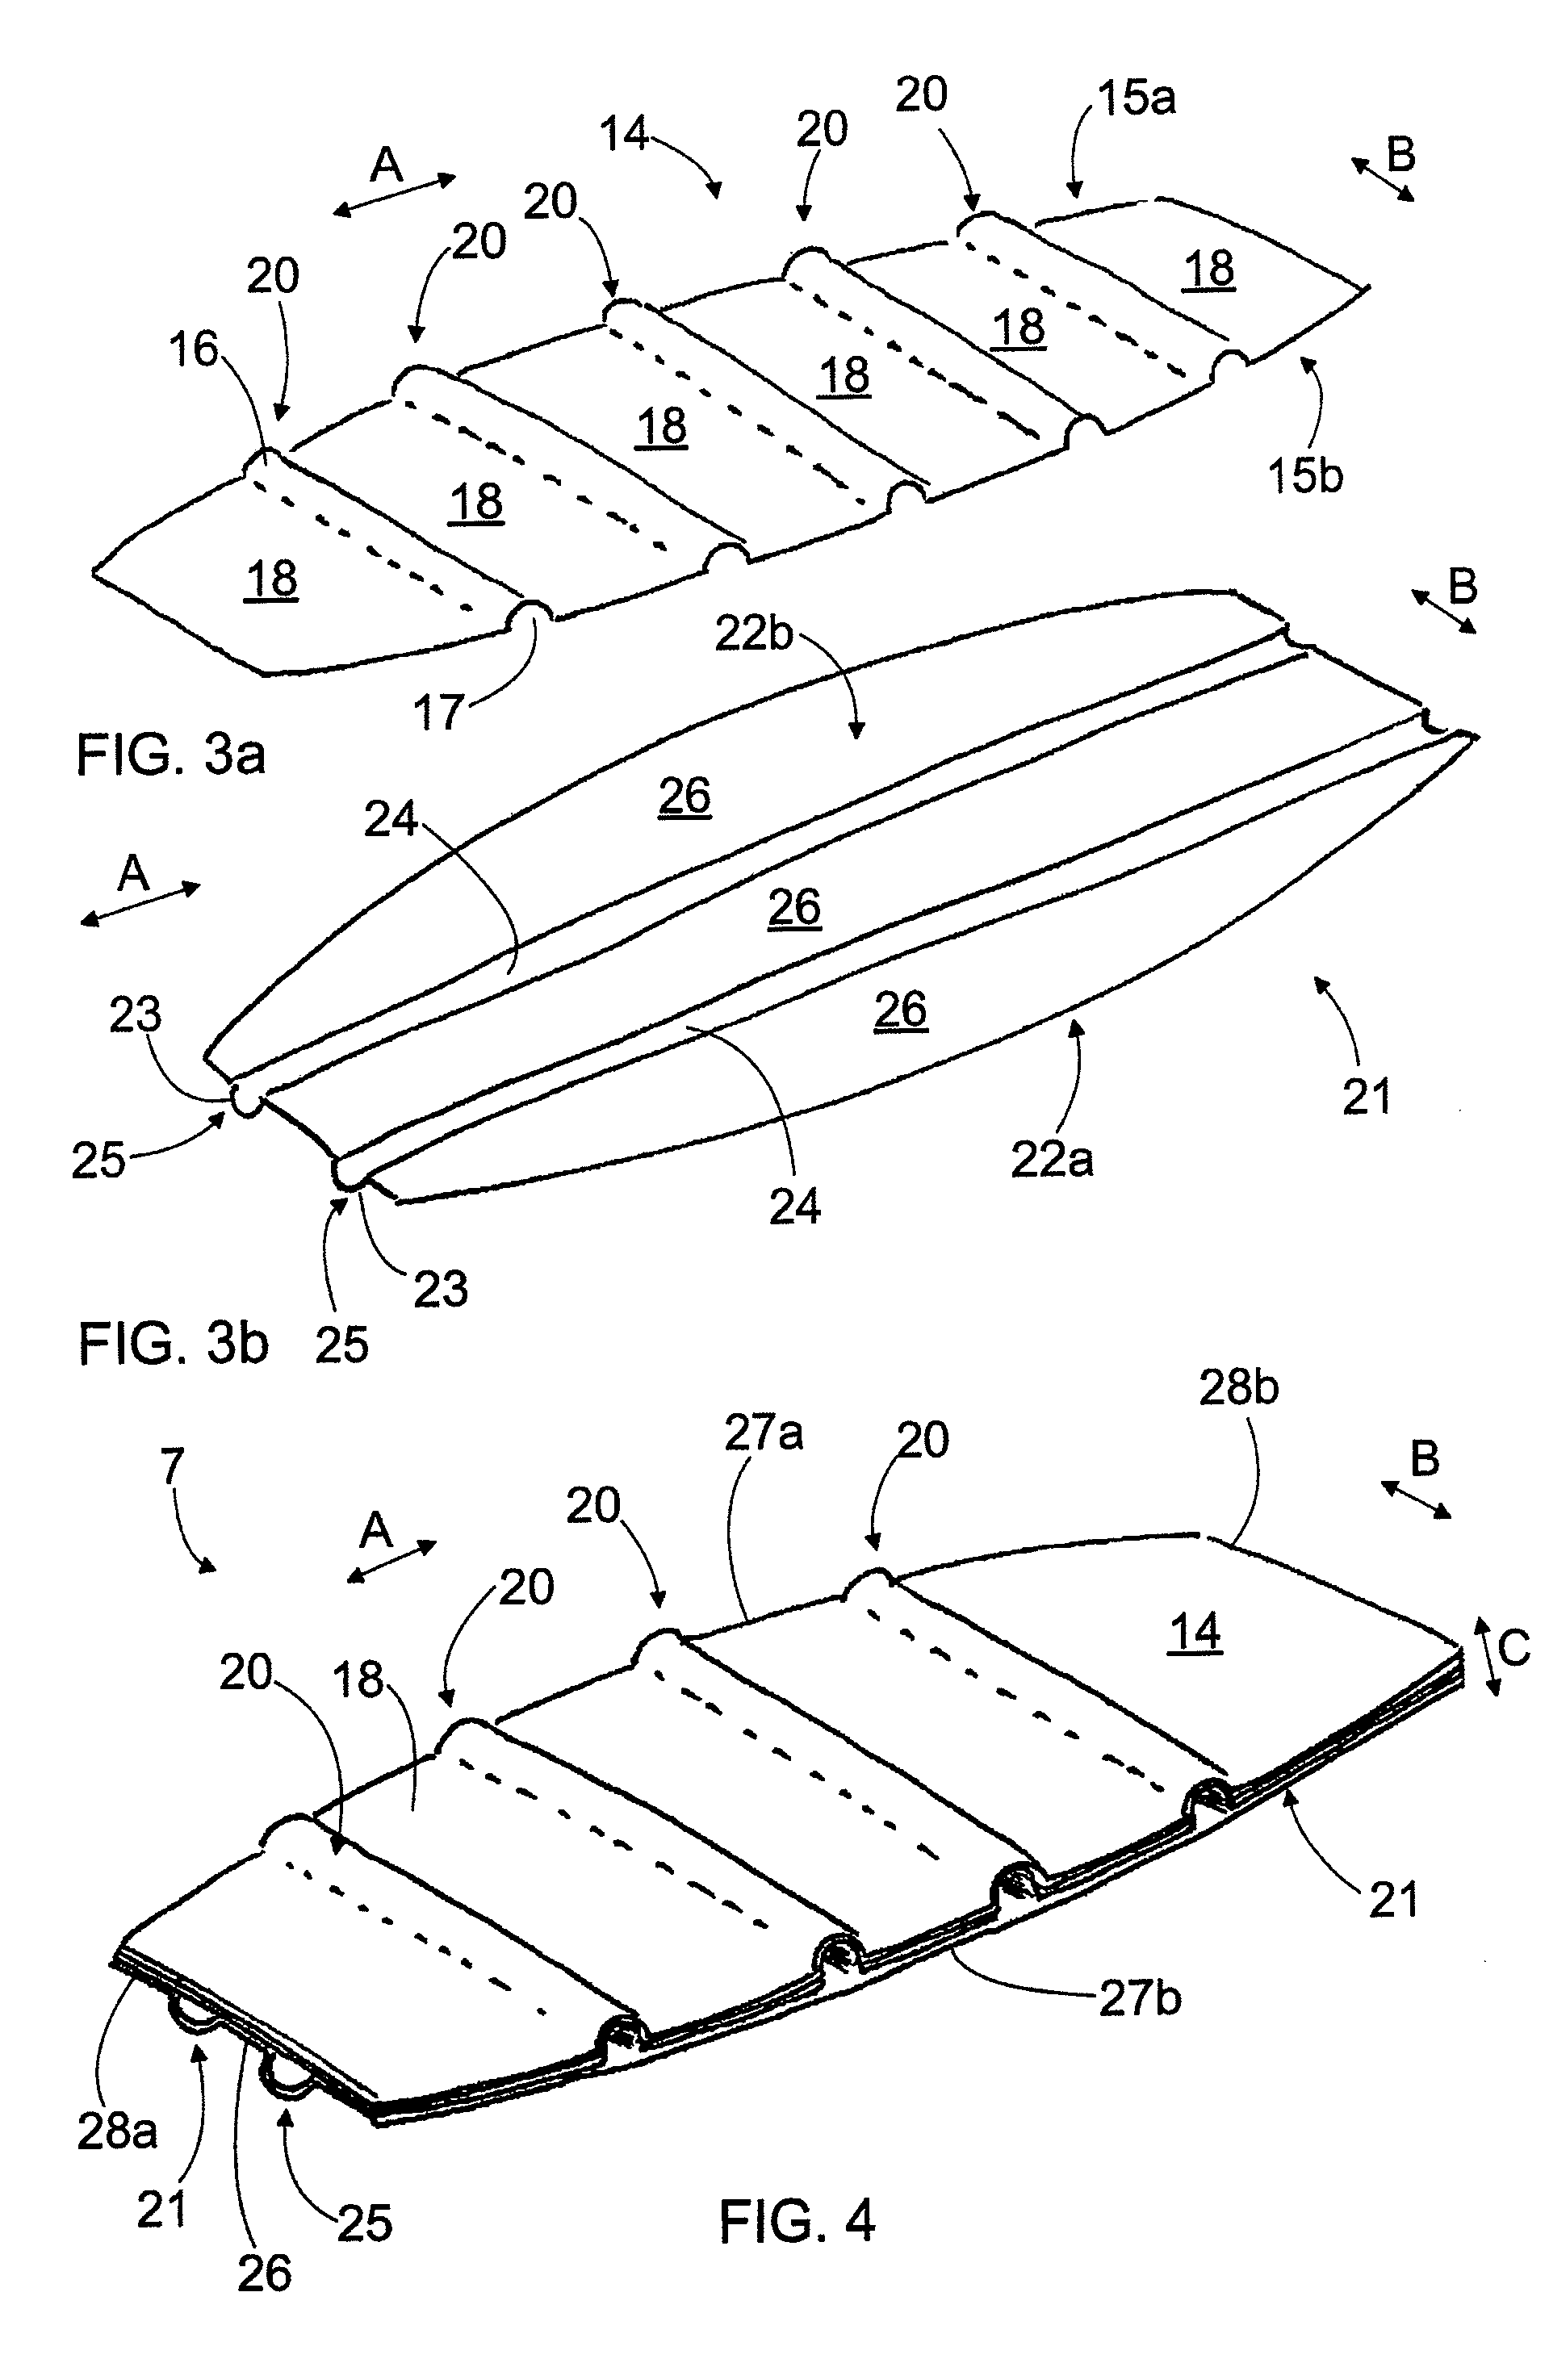 Curved element, wing, control surface and stabilizer for aircraft